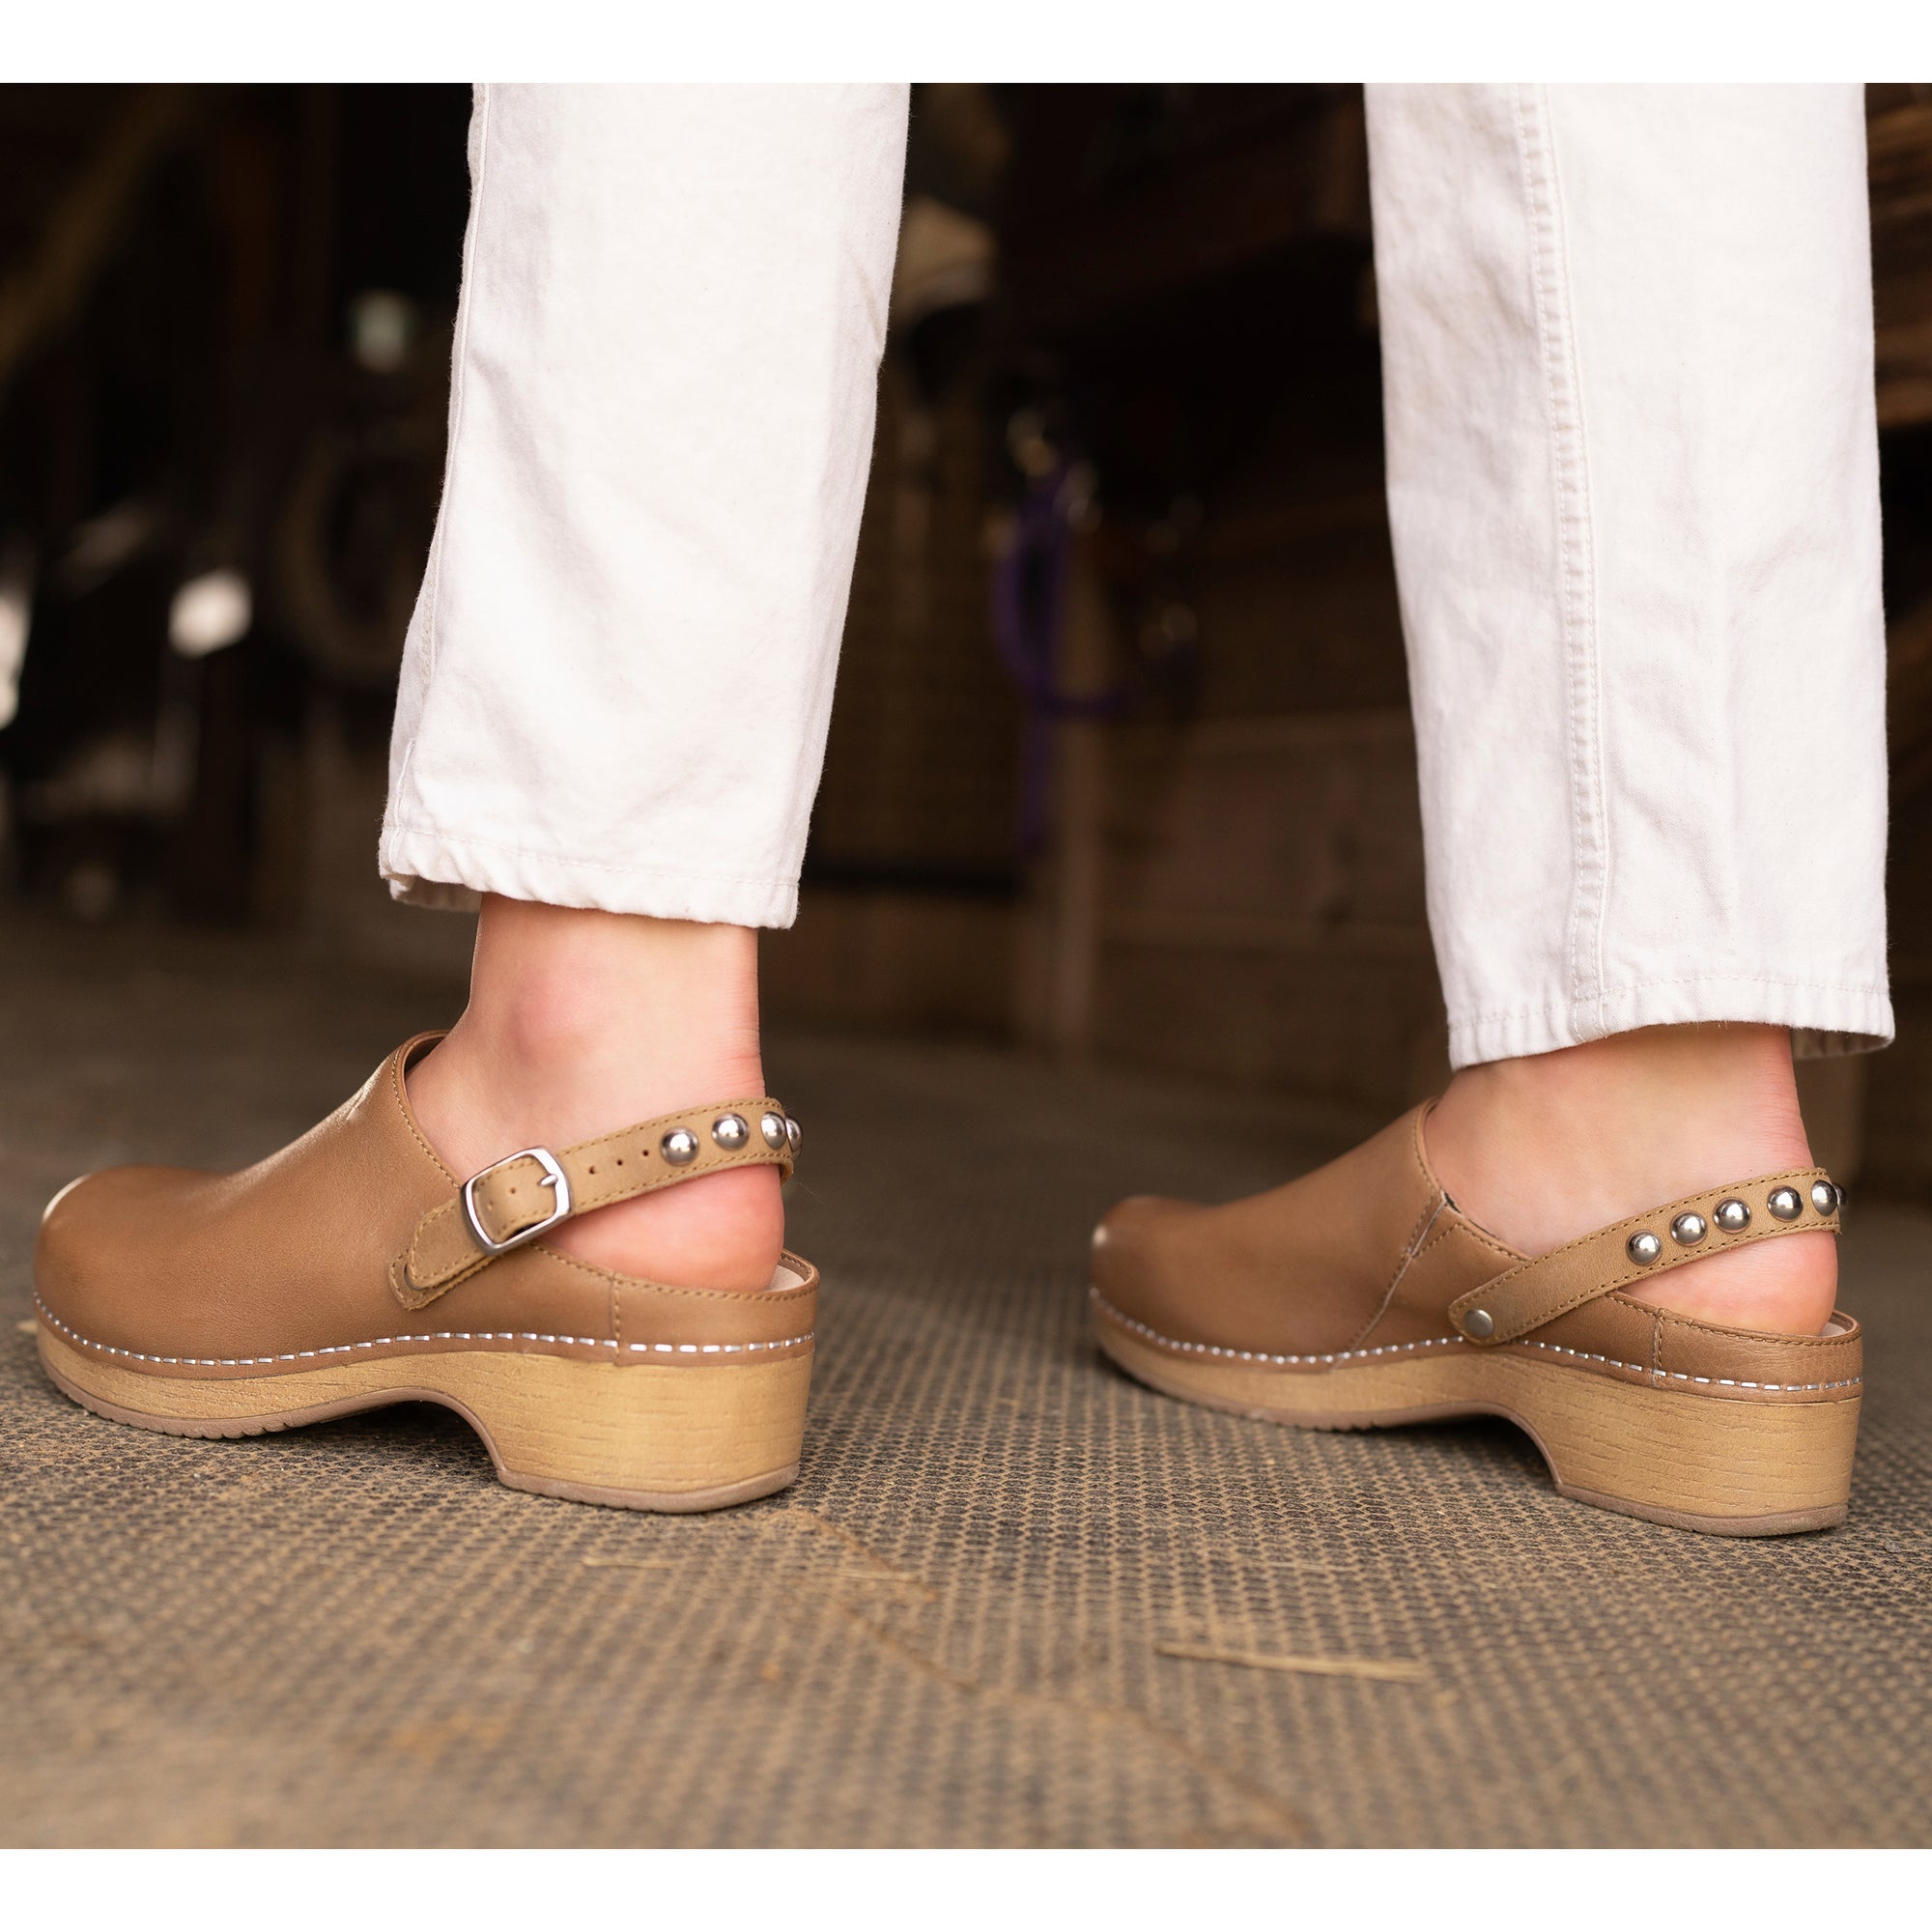 Tan mule clog with slingback strap and stylish hardware.